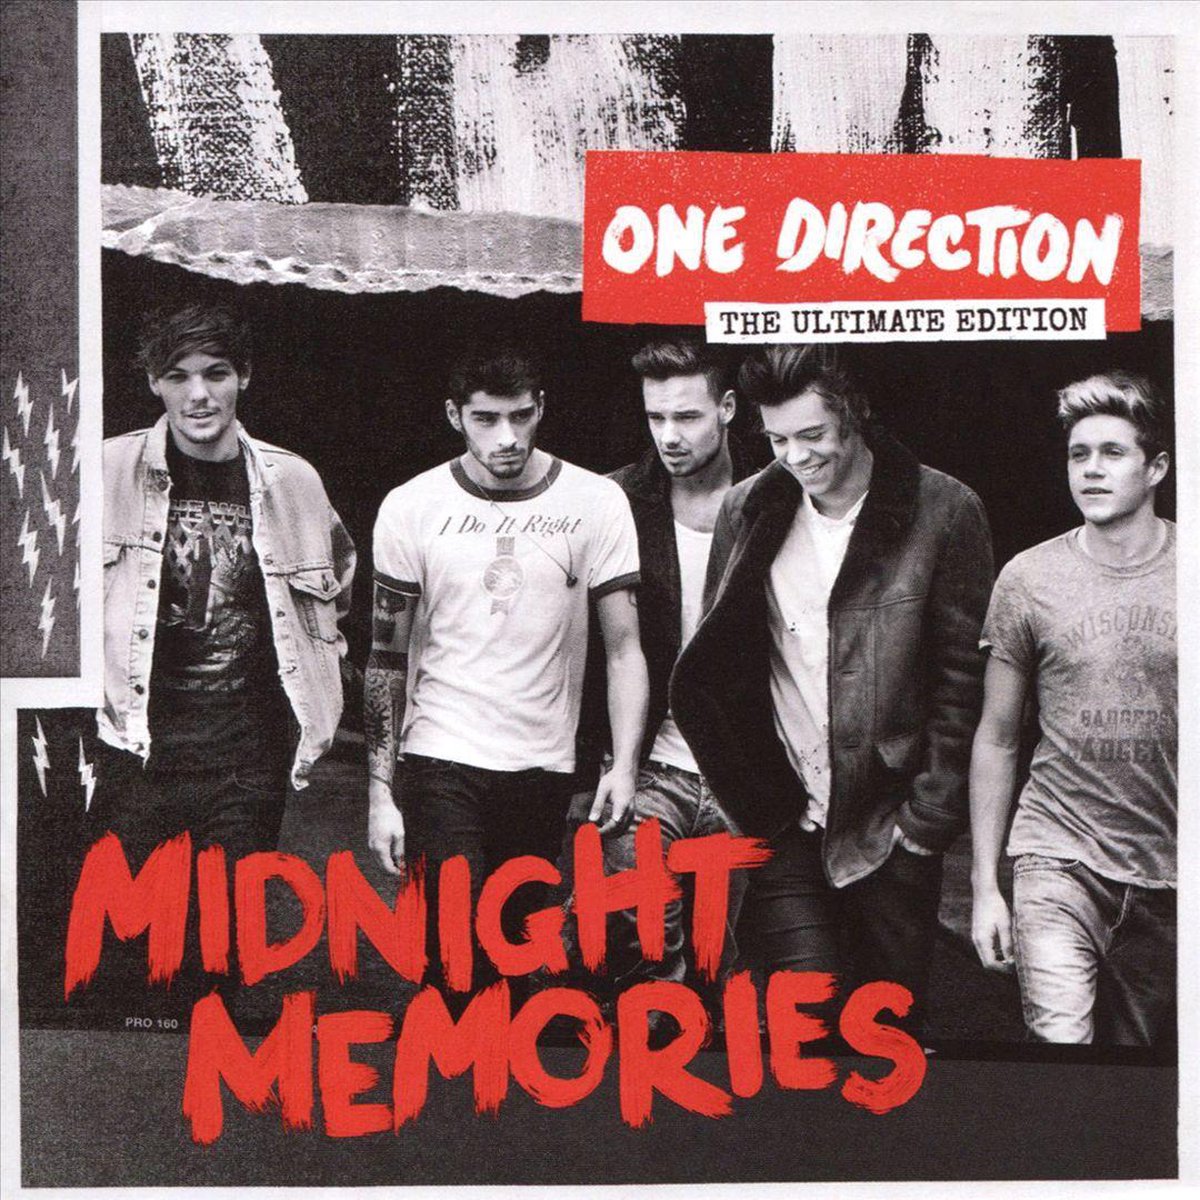 One Direction - Midnight Memories: Ultimate Edition - One Direction